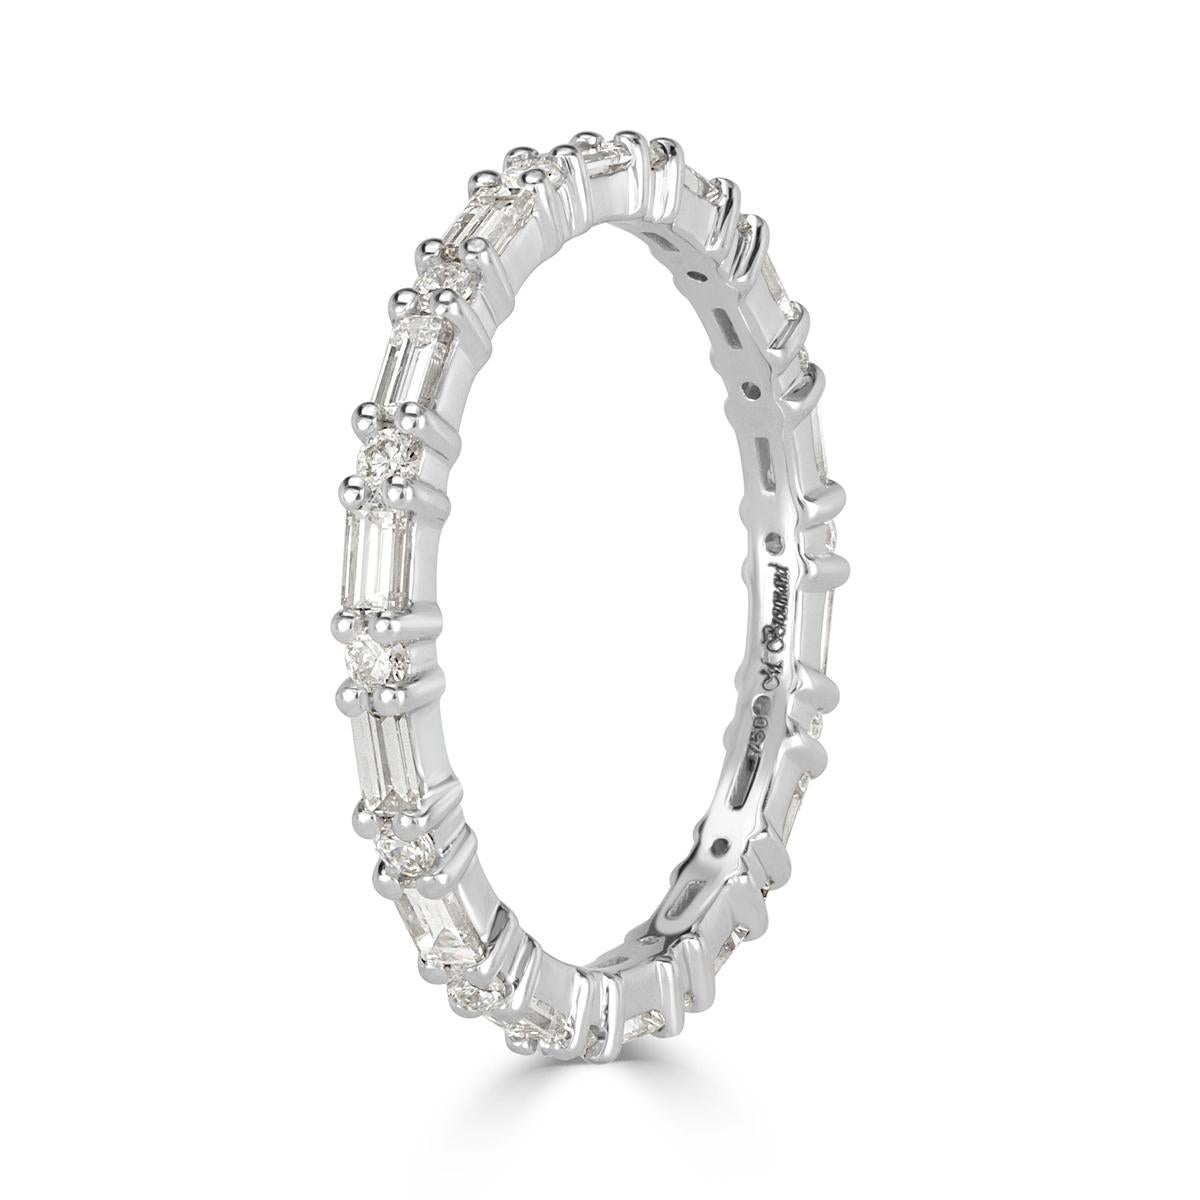 This truly ravishing diamond eternity band features an exquisite design of alternating baguette and round brilliant cut diamonds graded at E-F, VS1-VS2. The diamonds total 0.77ct in weight and are impeccably hand set in high polish platinum. All